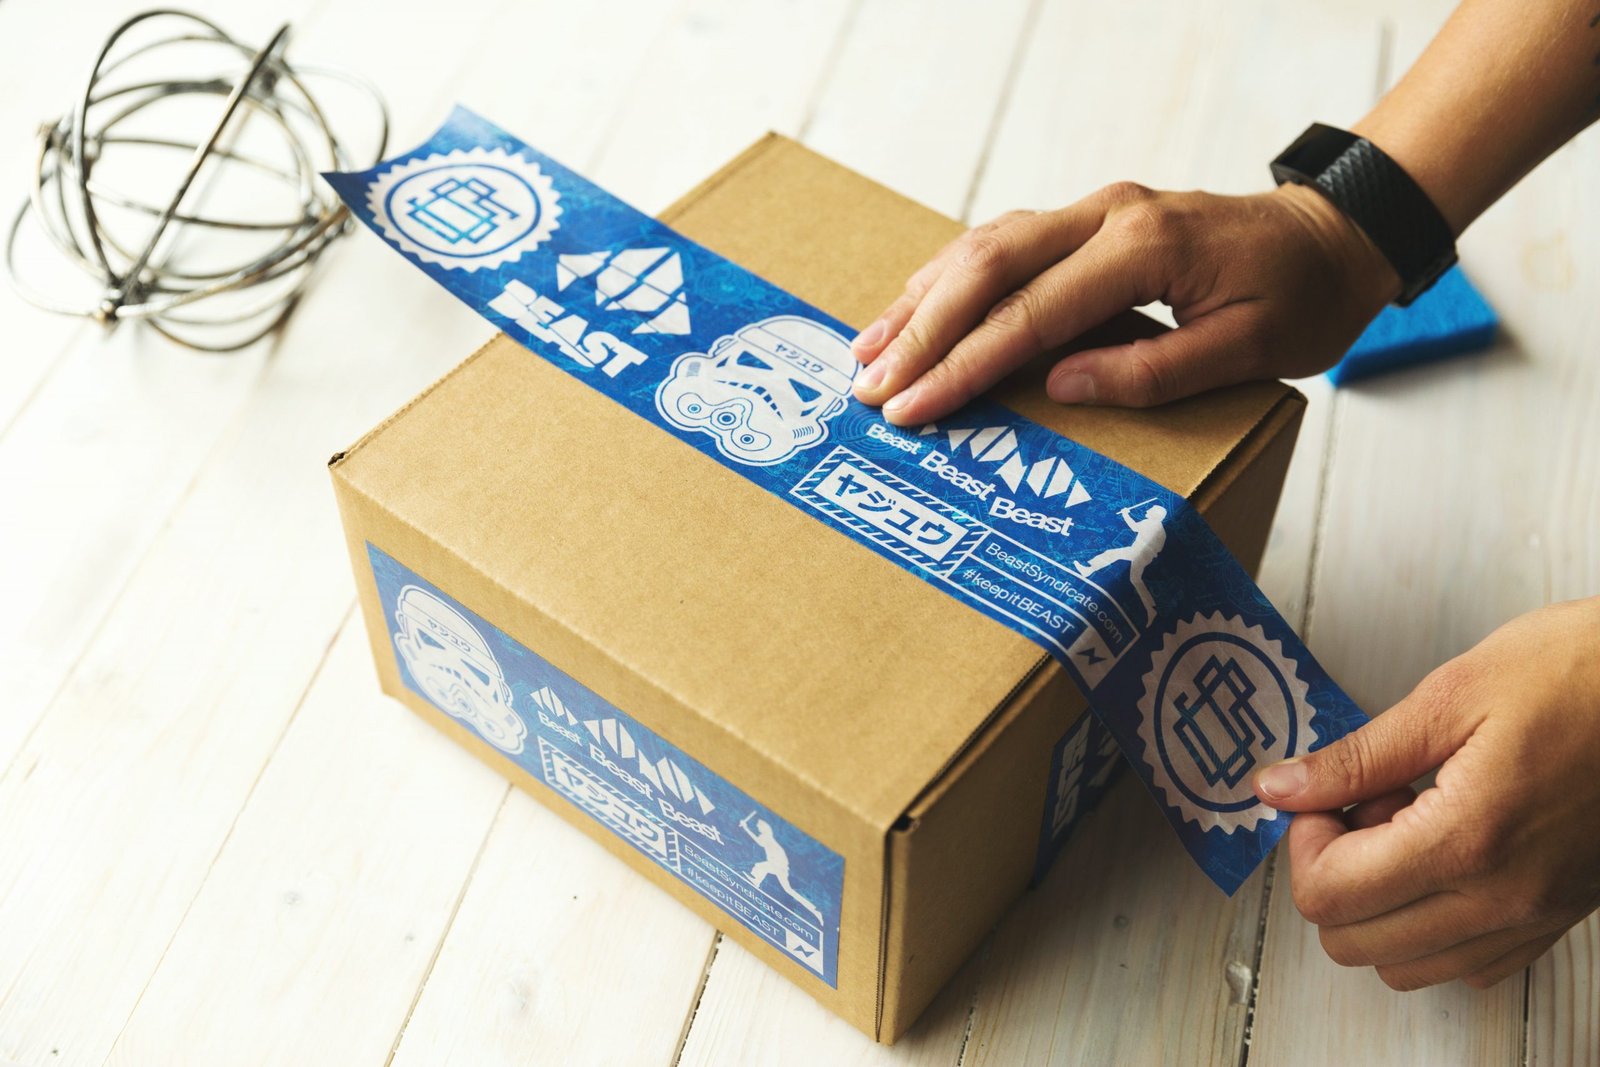 Interactive packaging